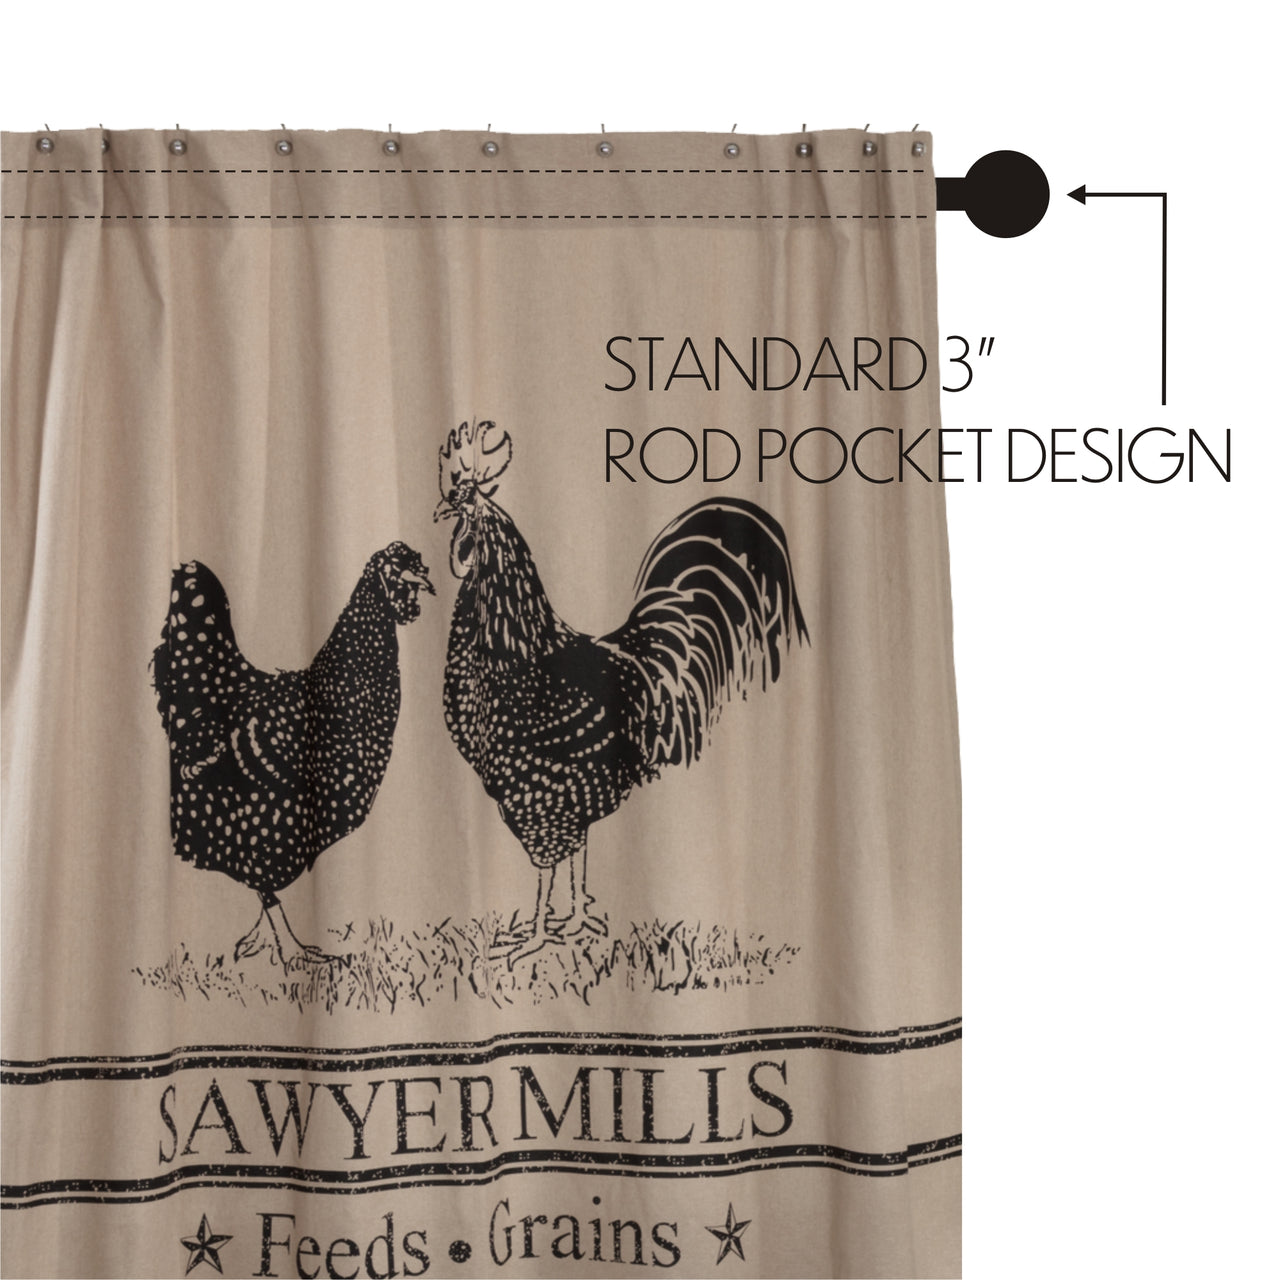 Sawyer Mill Charcoal Poultry Shower Curtain 72"x72"